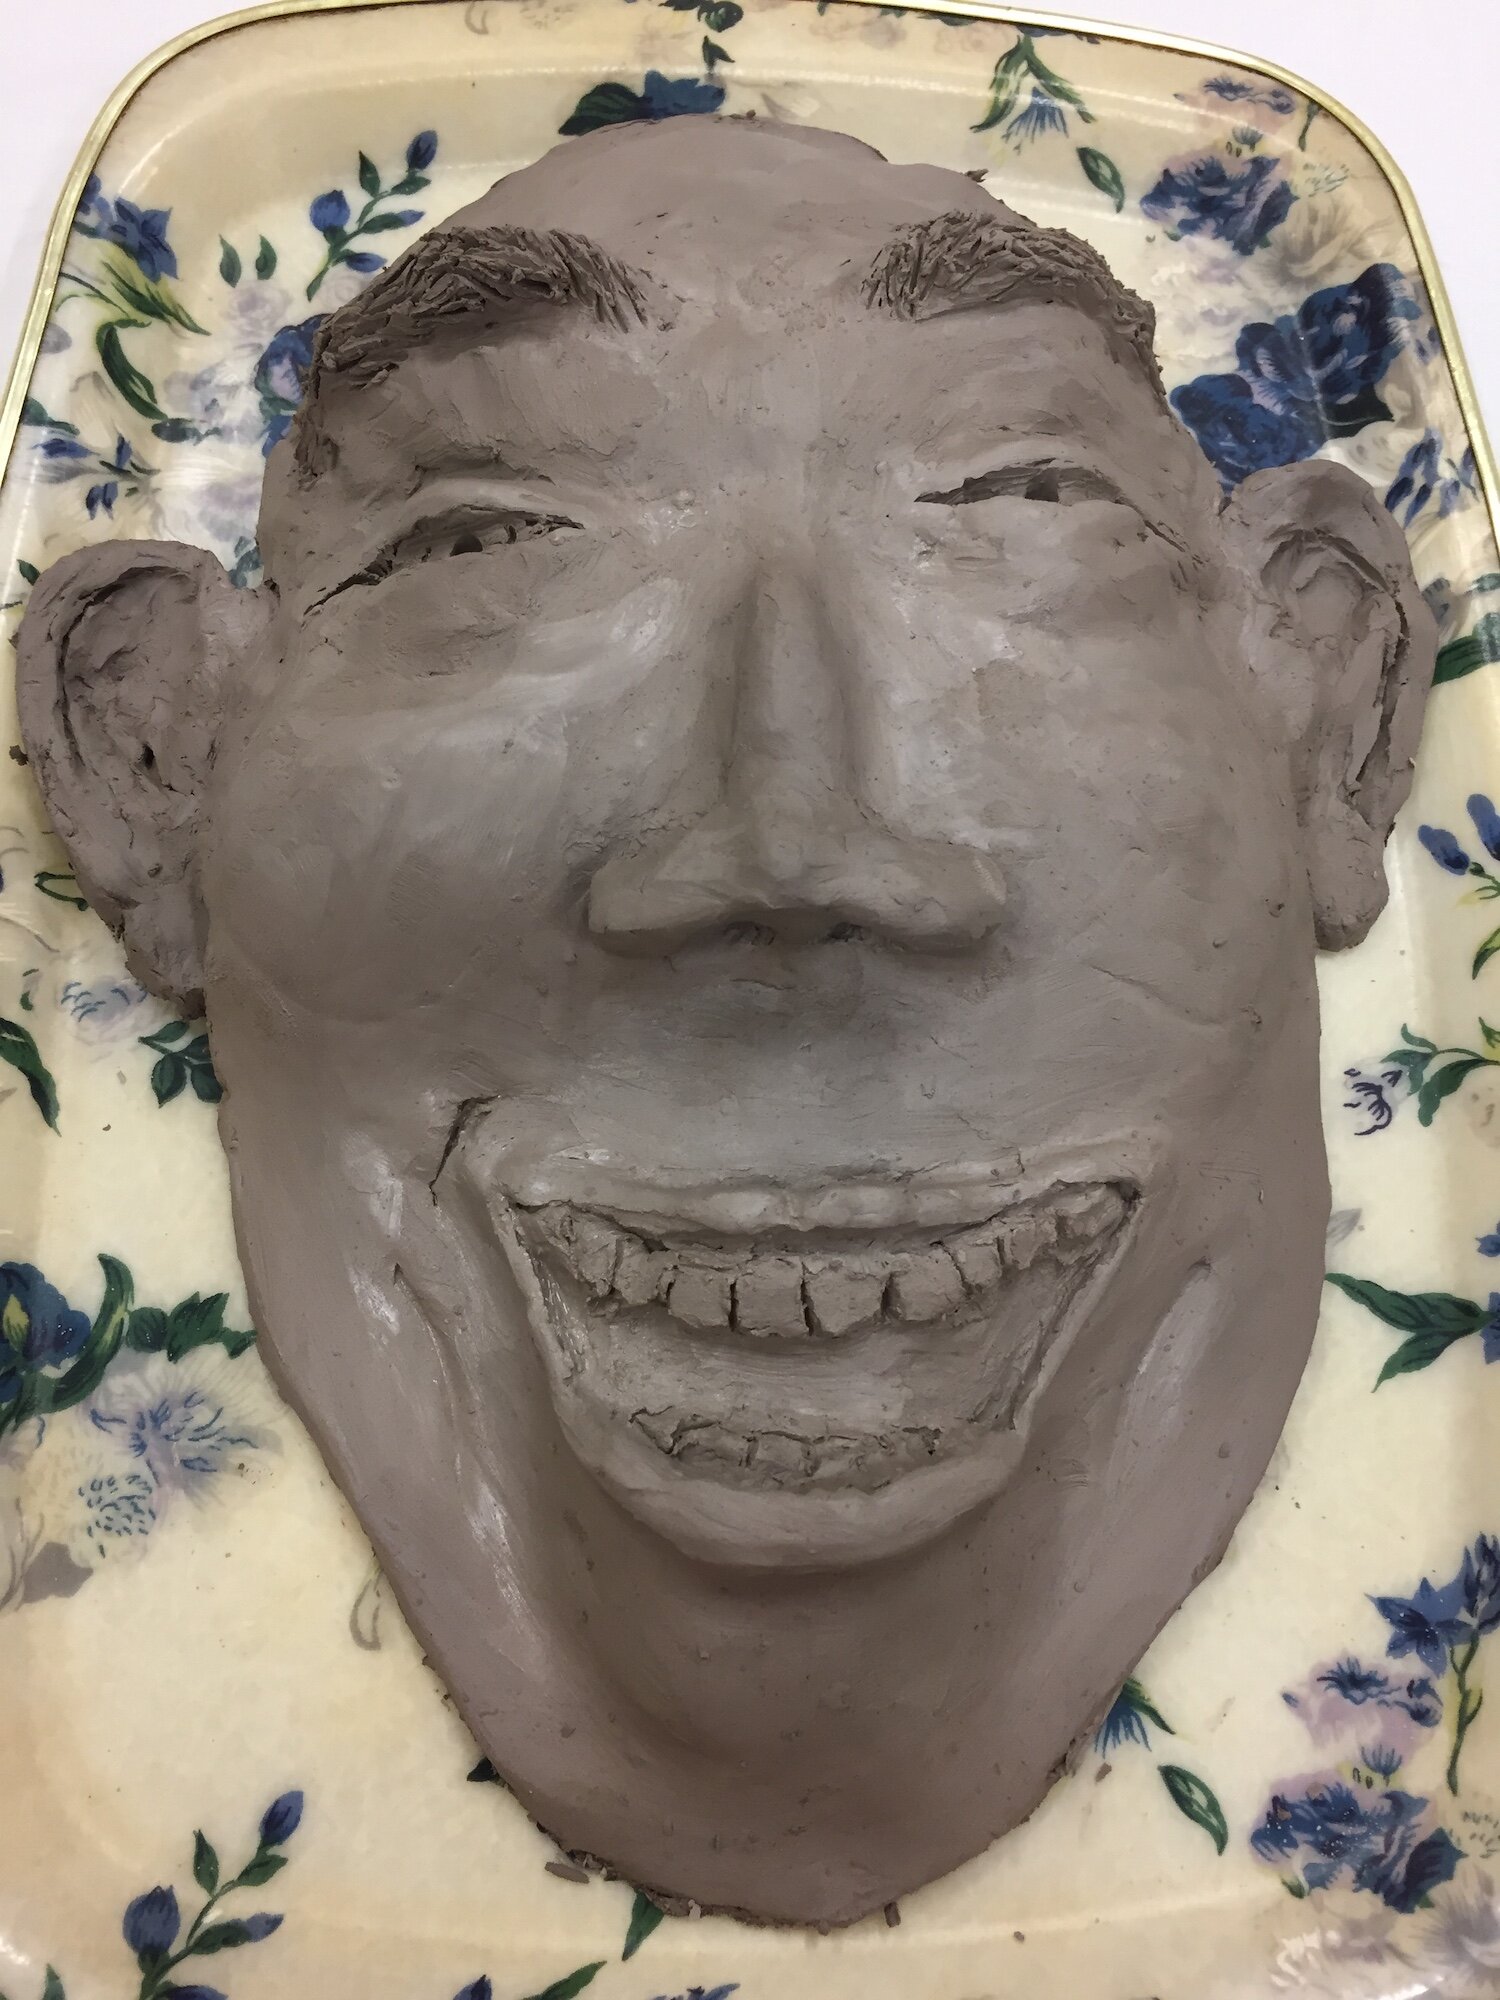 Professional Development Activity Away Day, Perth, Happy Facial Expression of Emotion, Clay Sculpture